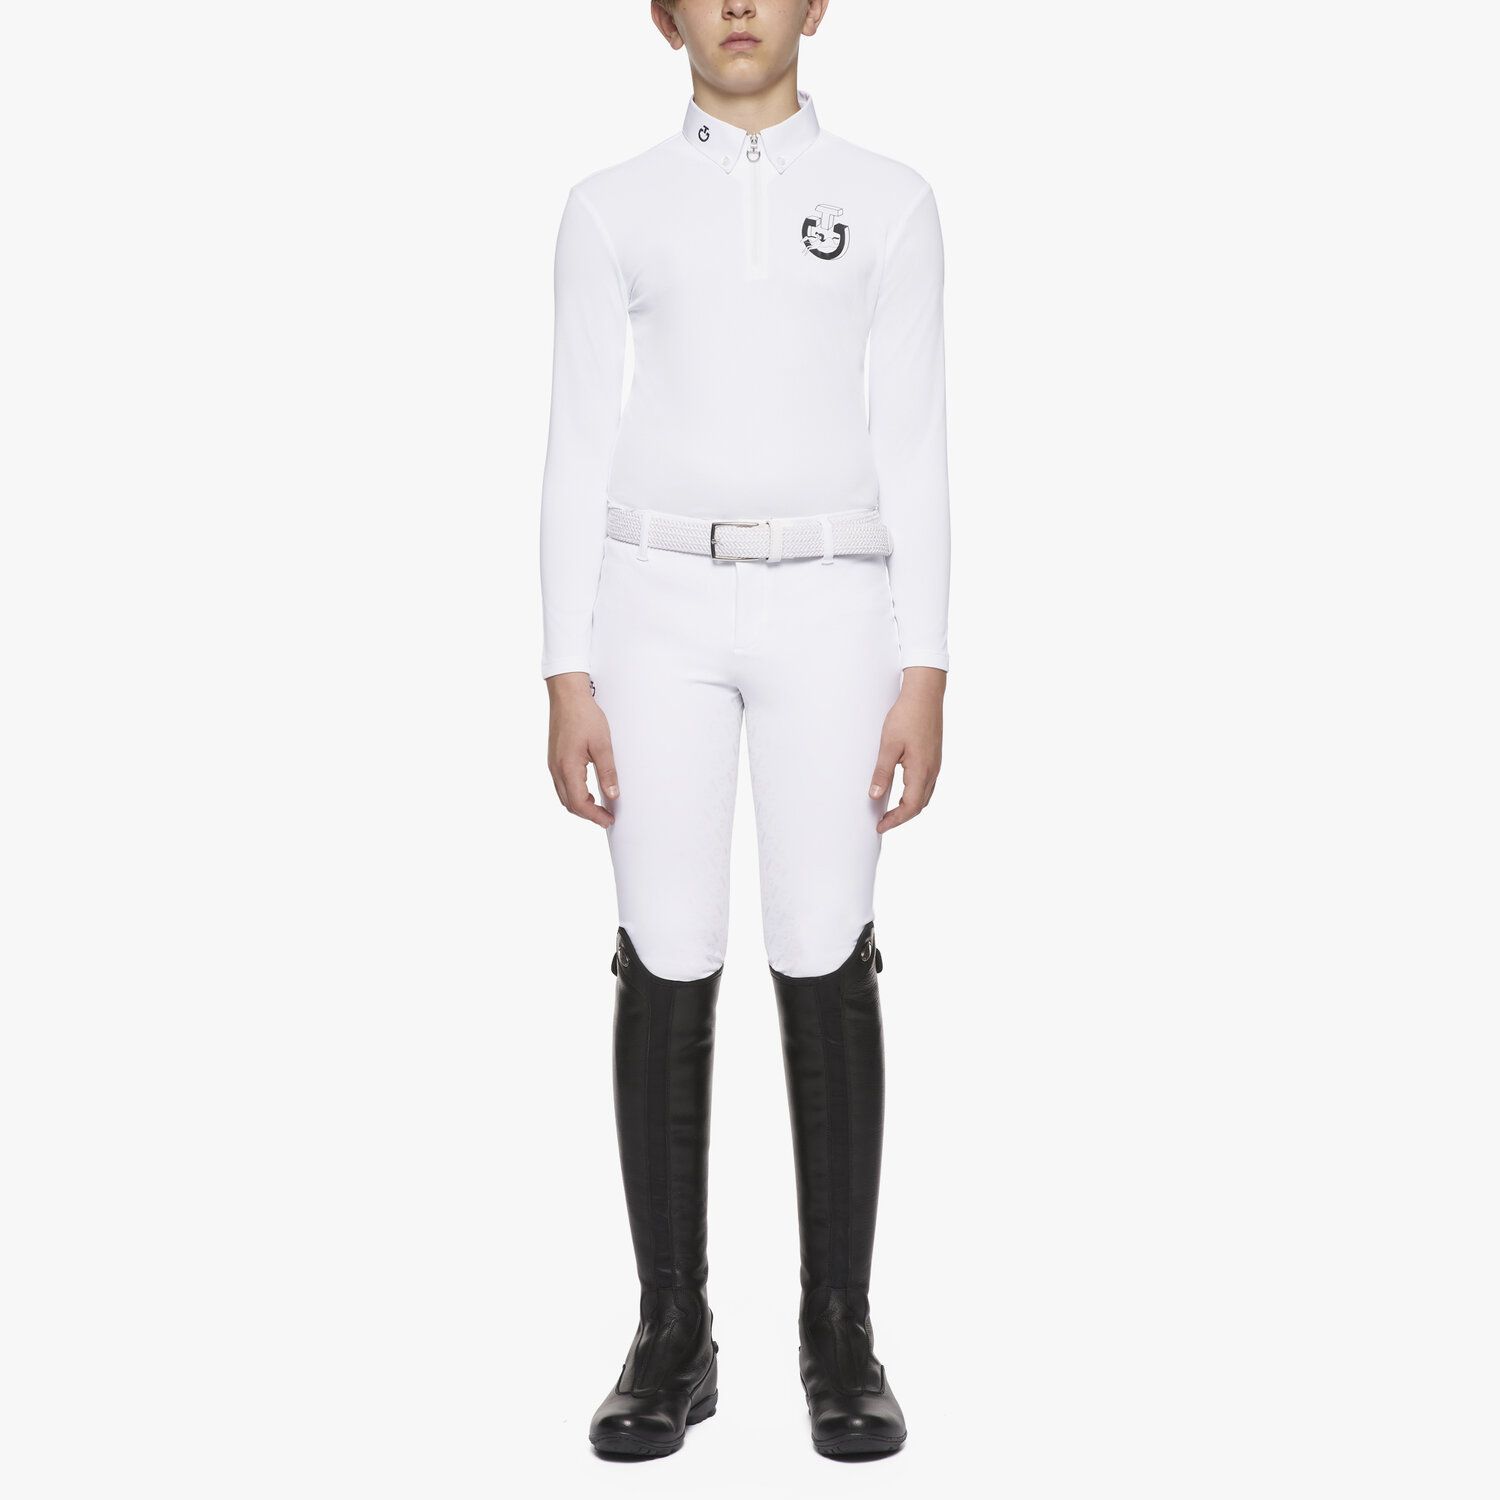 Boy's long-sleeved competition polo